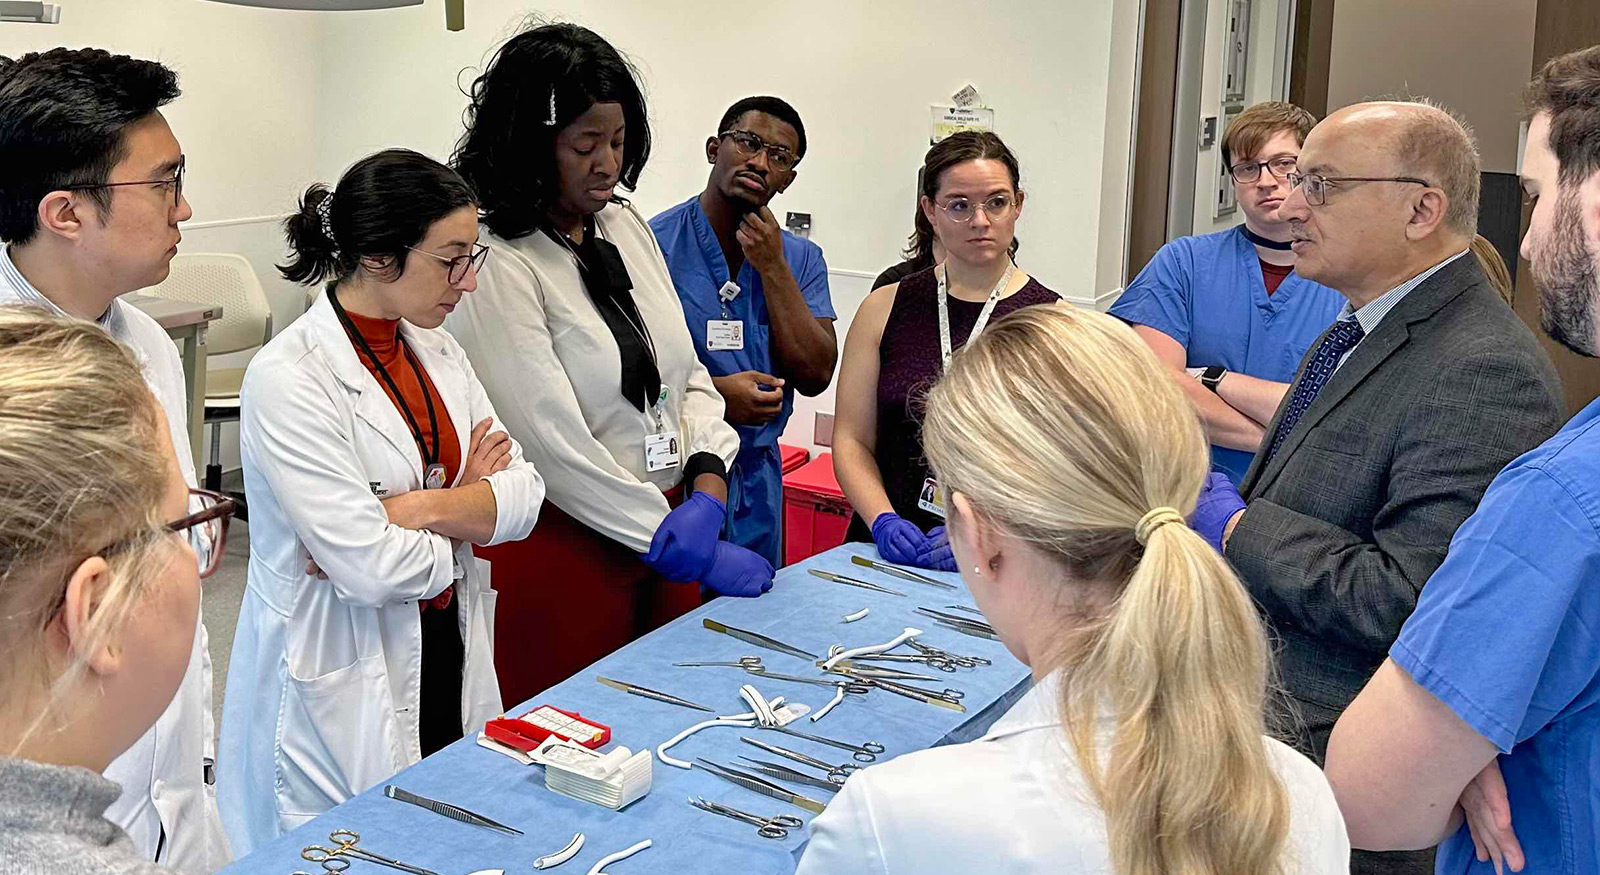 Surgery residents in the Simulation Center around a table listening to a faculty member.